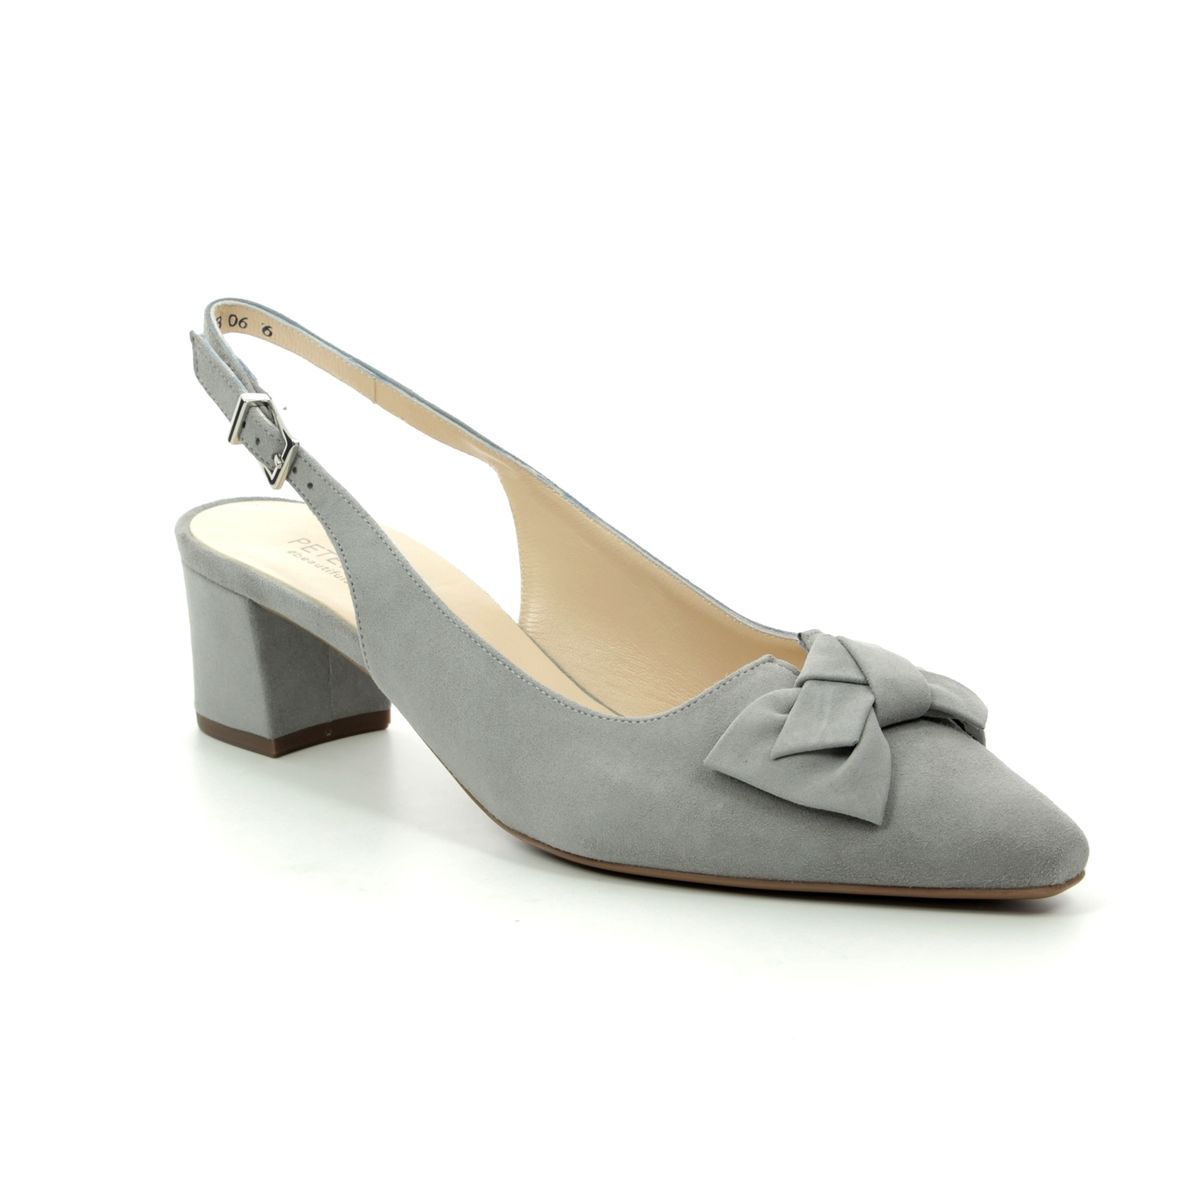 light grey suede shoes